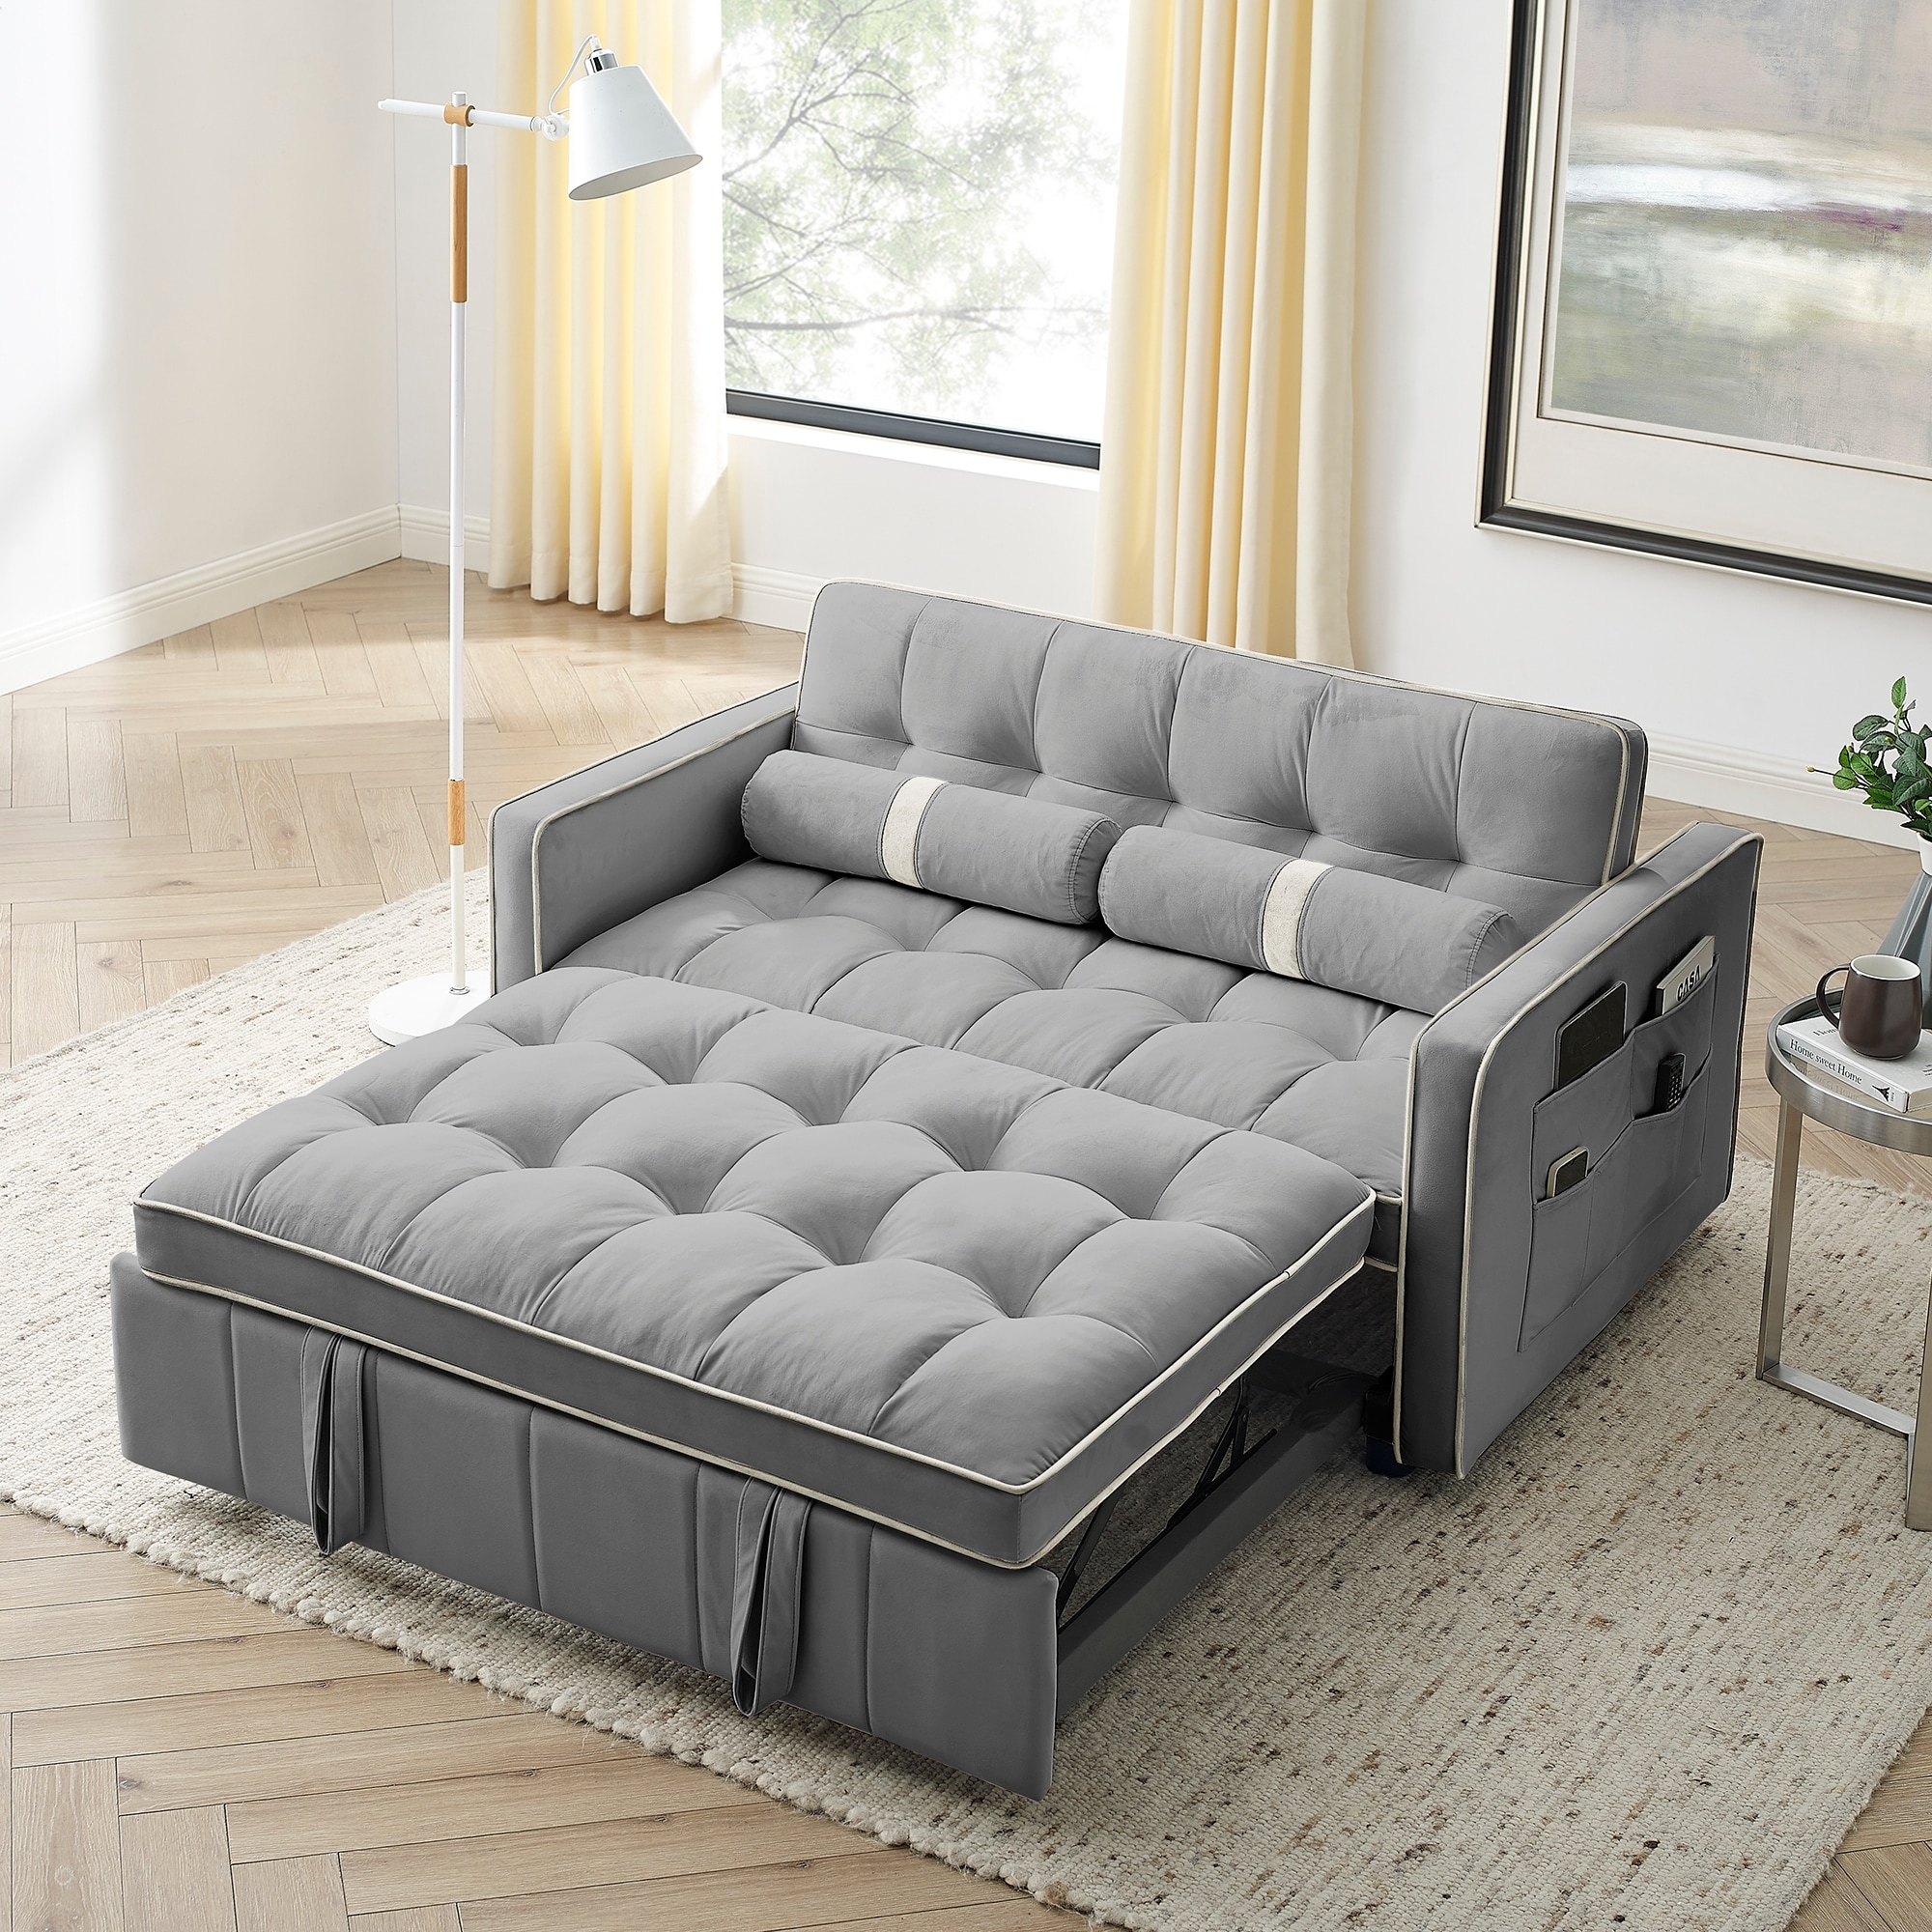 White Folding Sofa Velcro Fixed Arms Sleeper Loveseat w/ Coffee Table - Bed  Bath & Beyond - 39450133